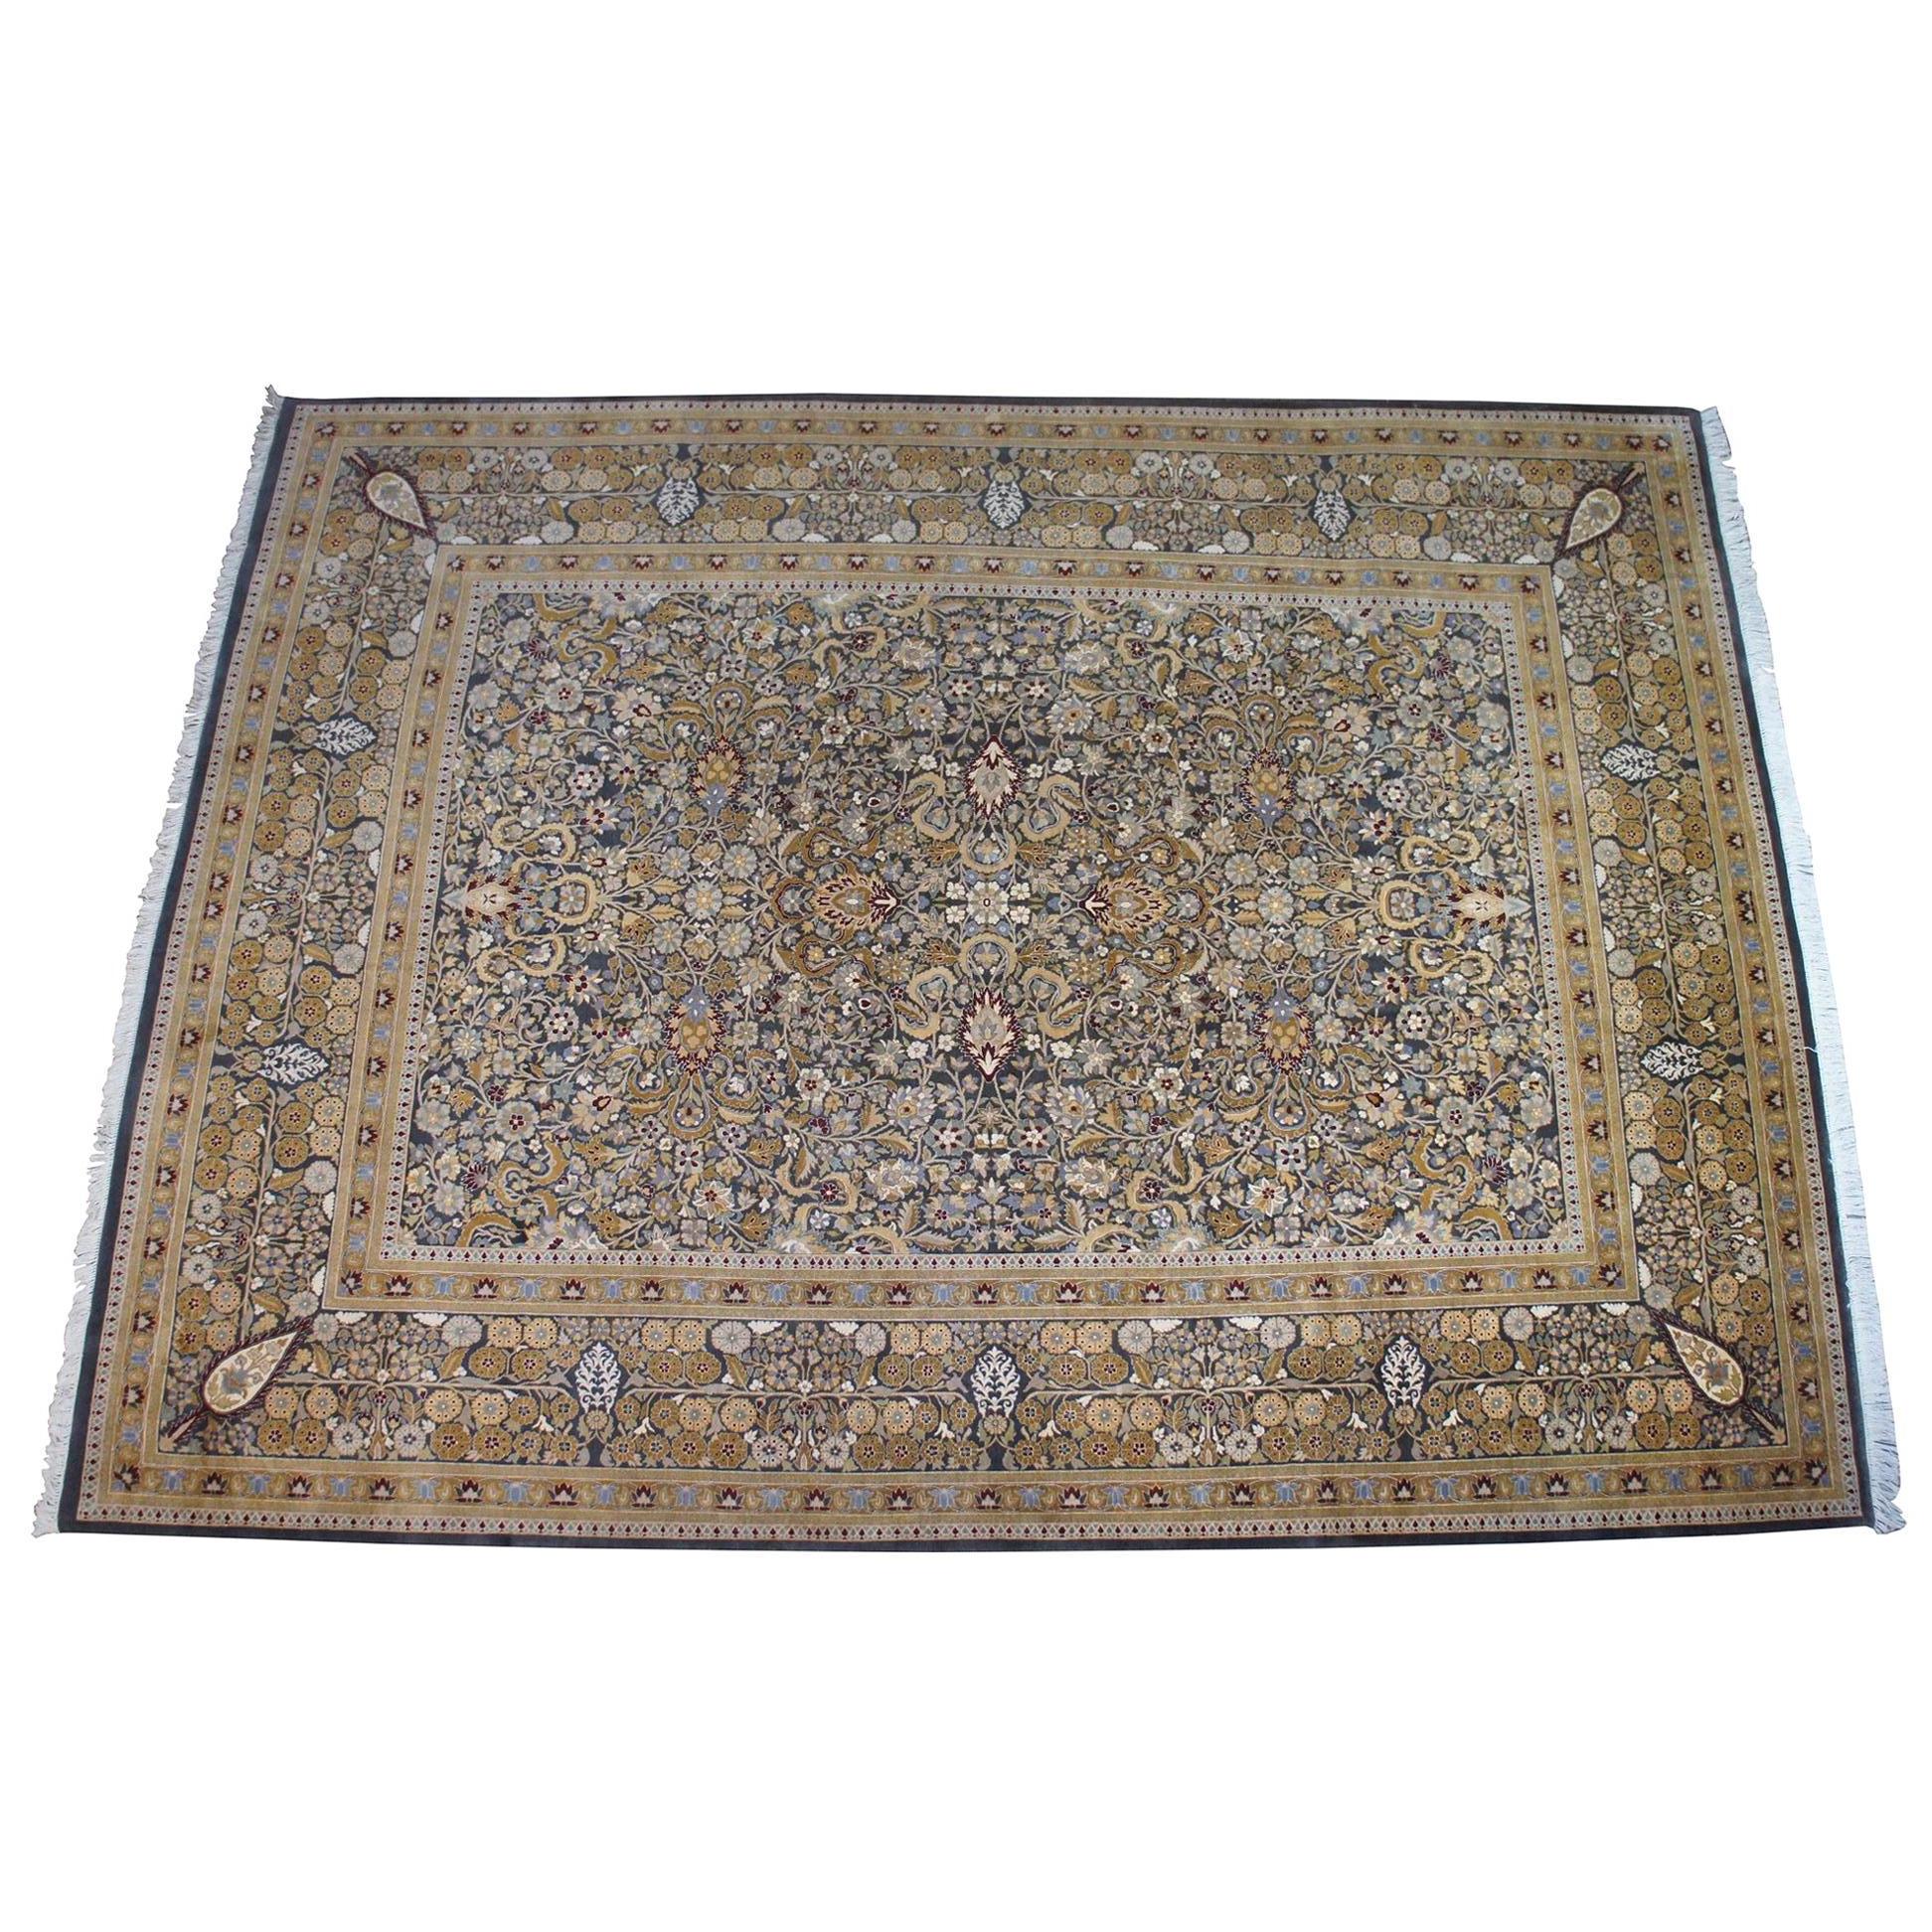 Vintage Indian Jaipur silk and wool rectangular area rug featuring a floral motif throughout a field of gray with beige / tan, reds, blues, gold and green. Measures: 9